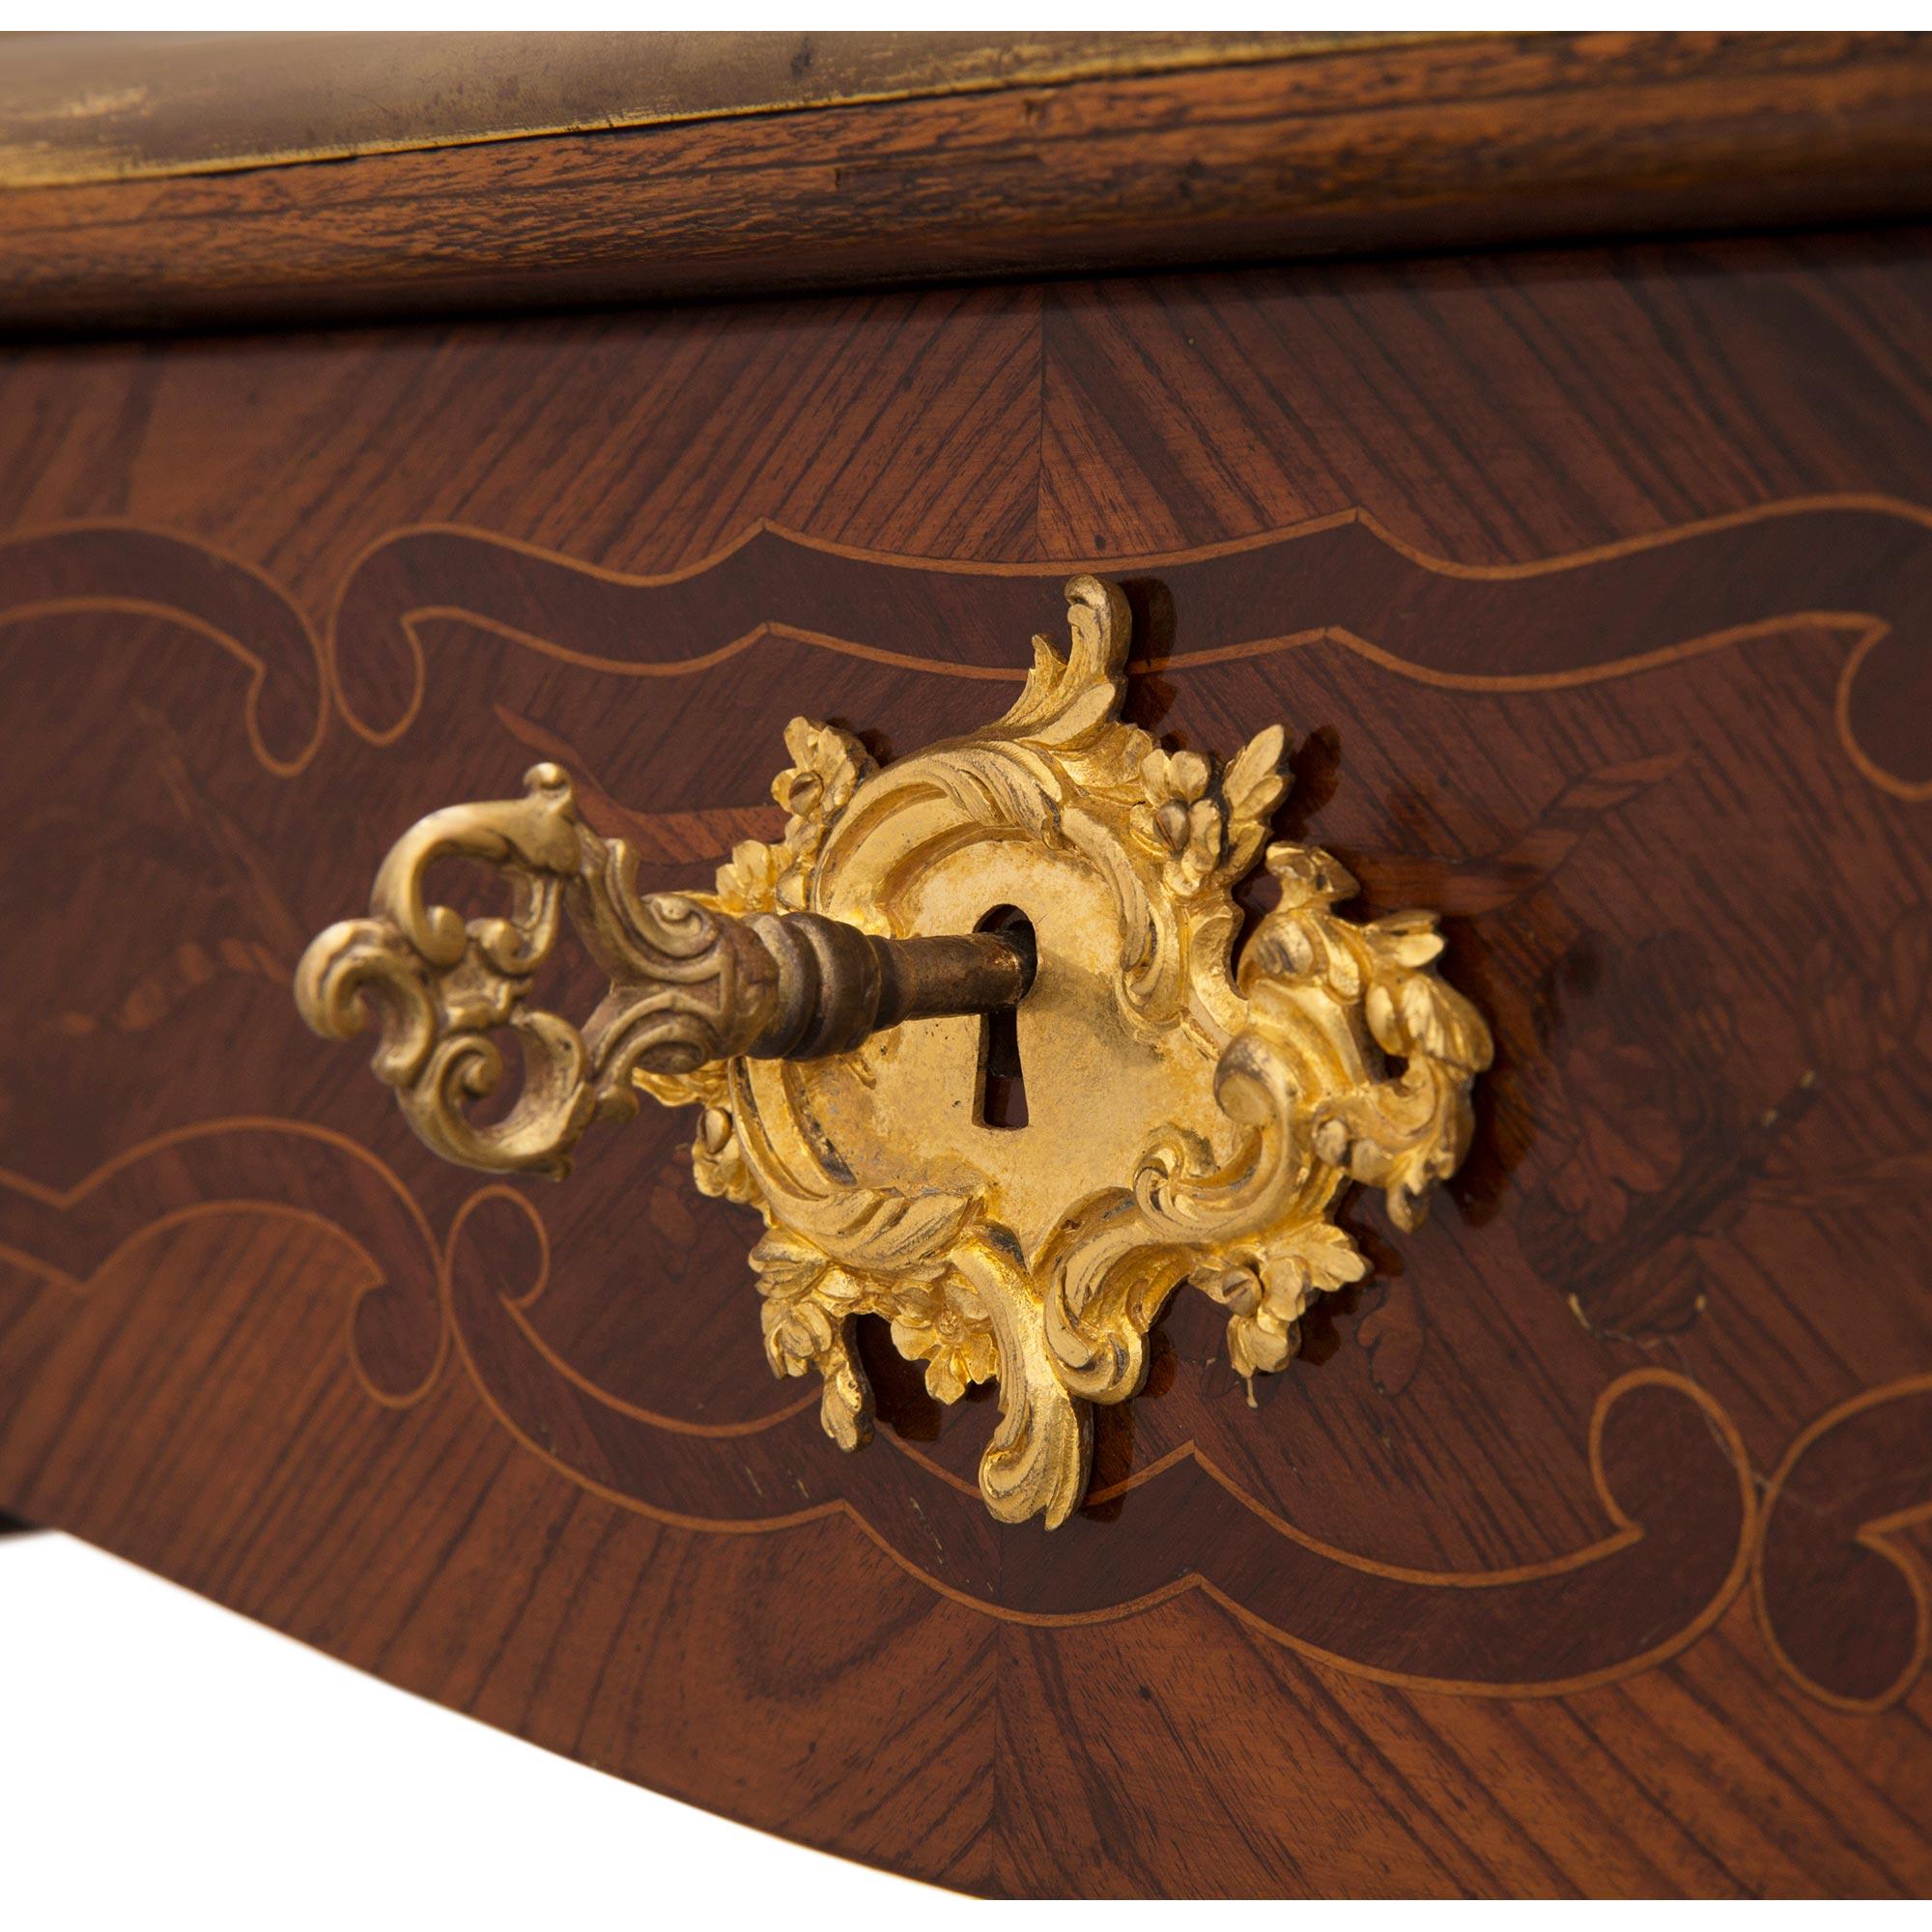 French 19th Century Louis XV Style Kingwood, Tulipwood, Ormolu and Leather Desk For Sale 4